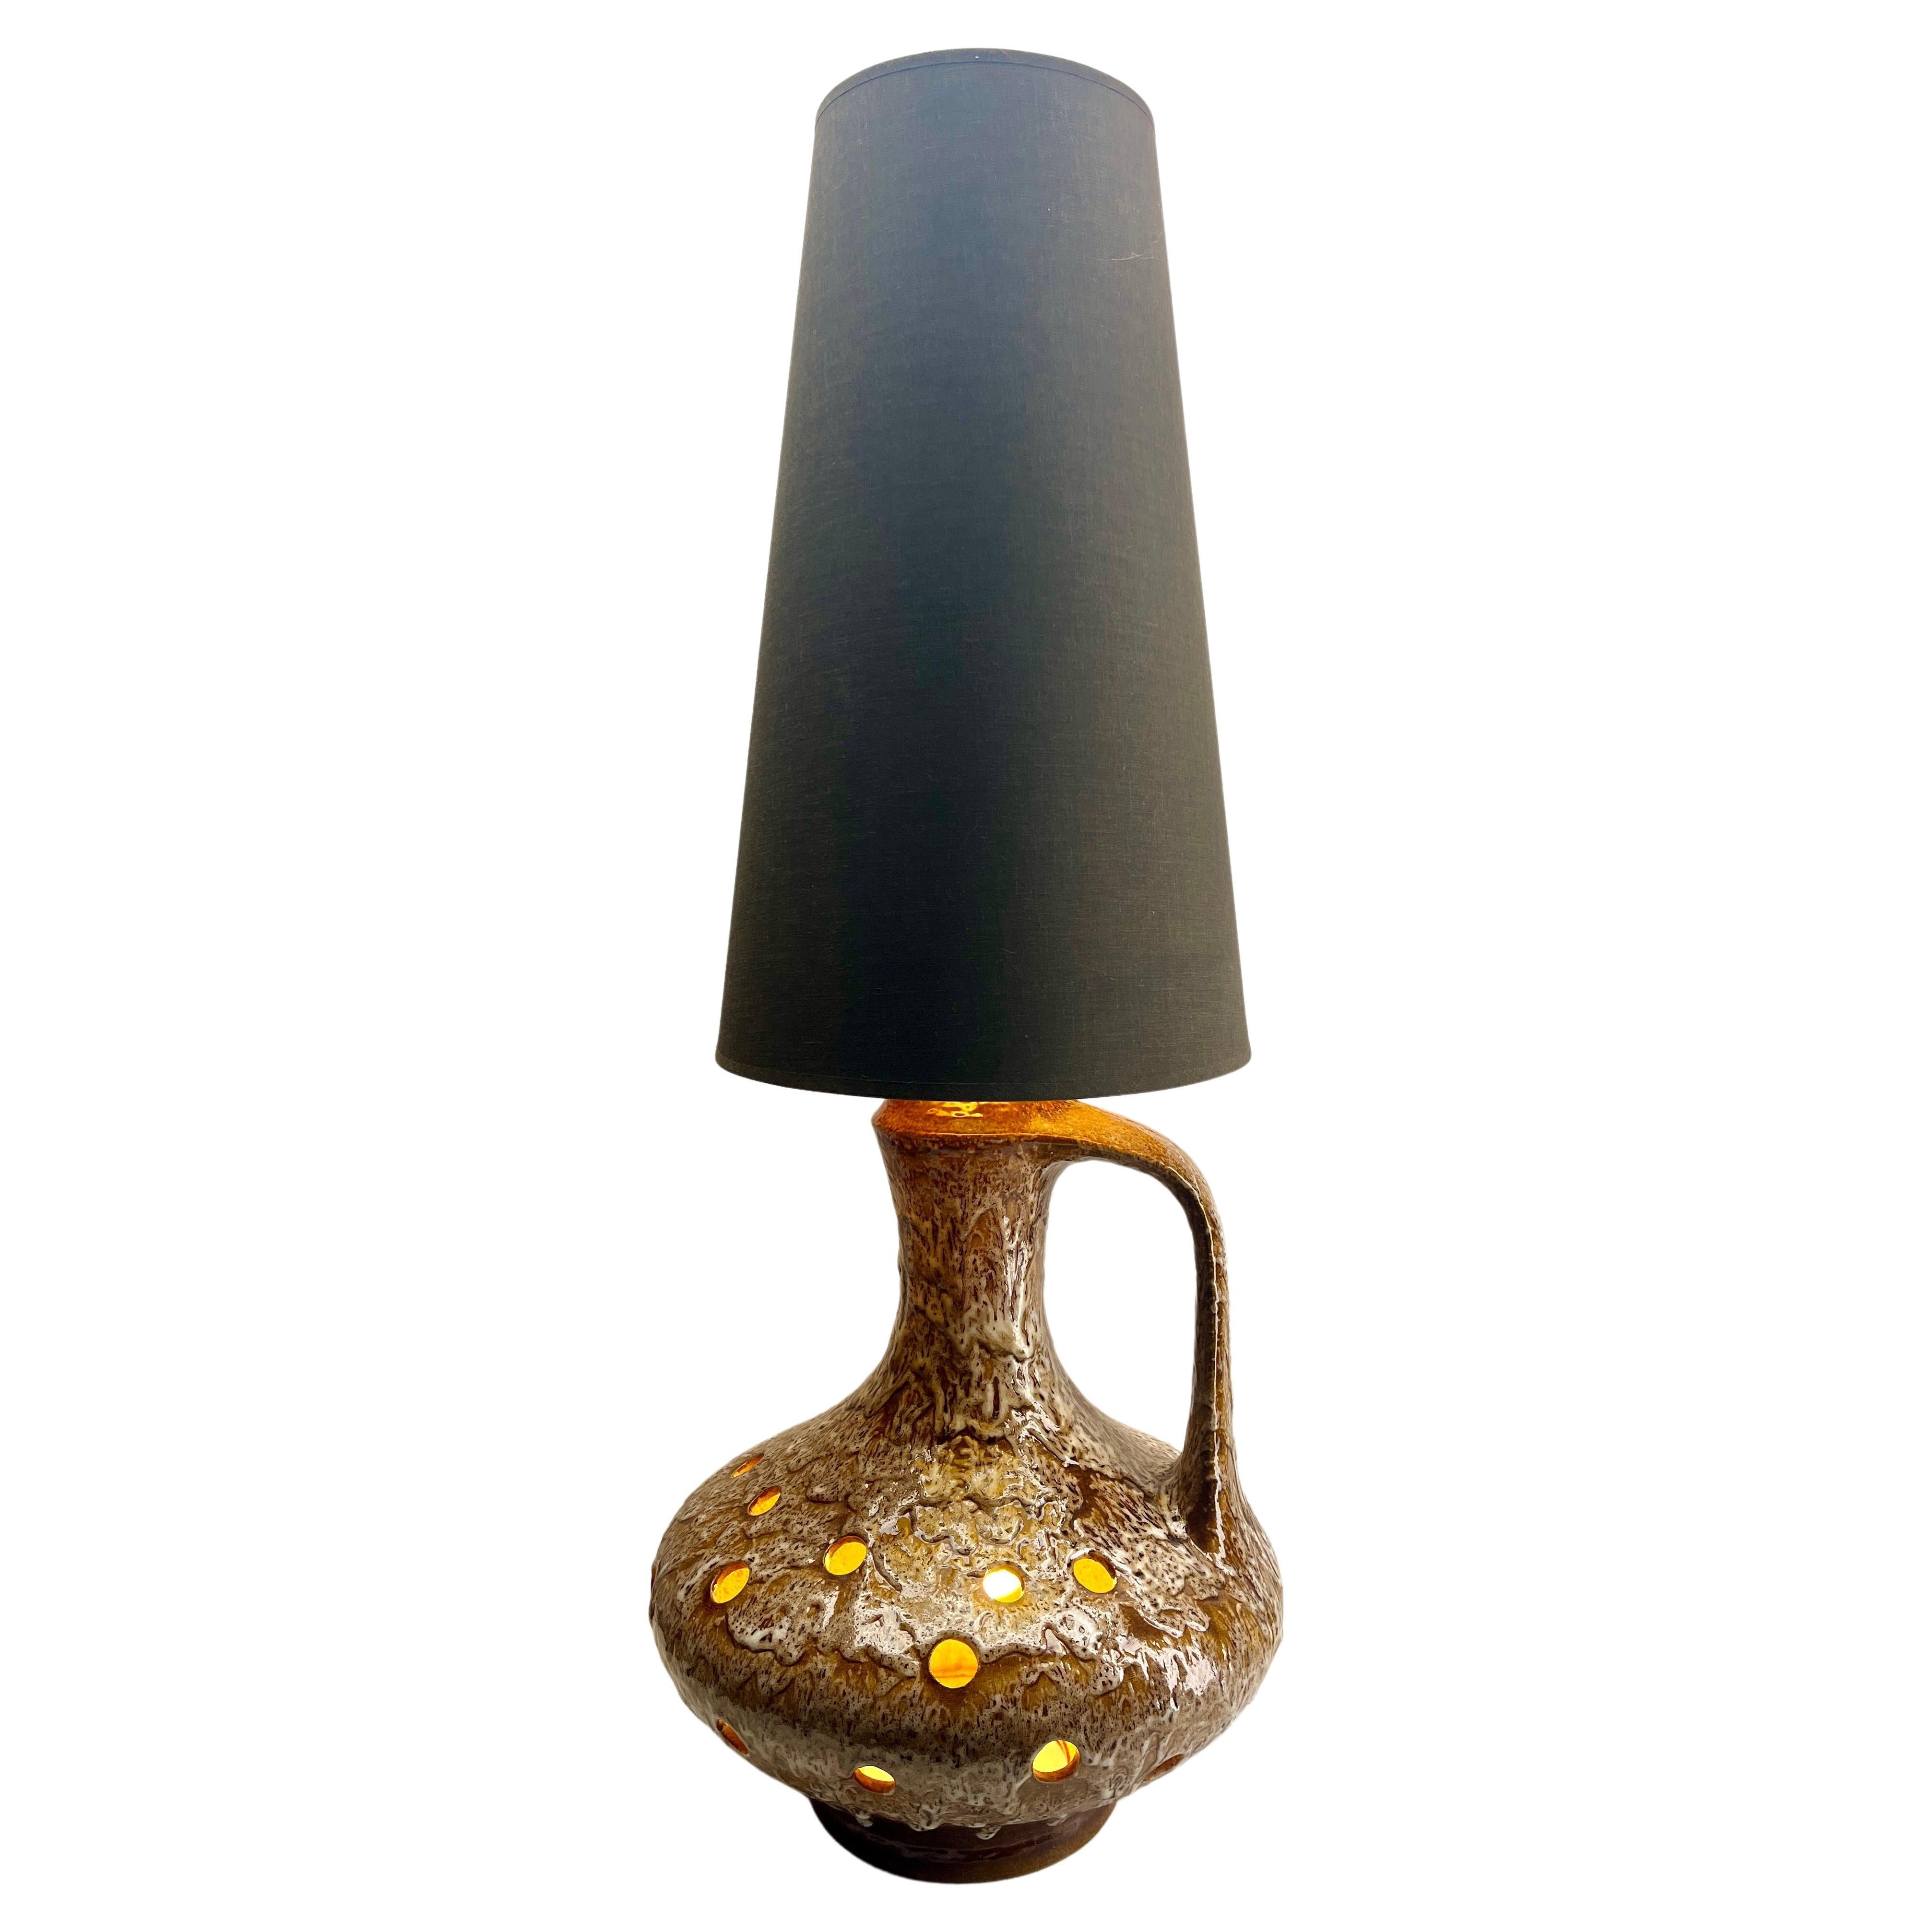 German Vintage Fat Lava Floor Lamp Brown tones and white Drip-Glazes by Walter Gerhards